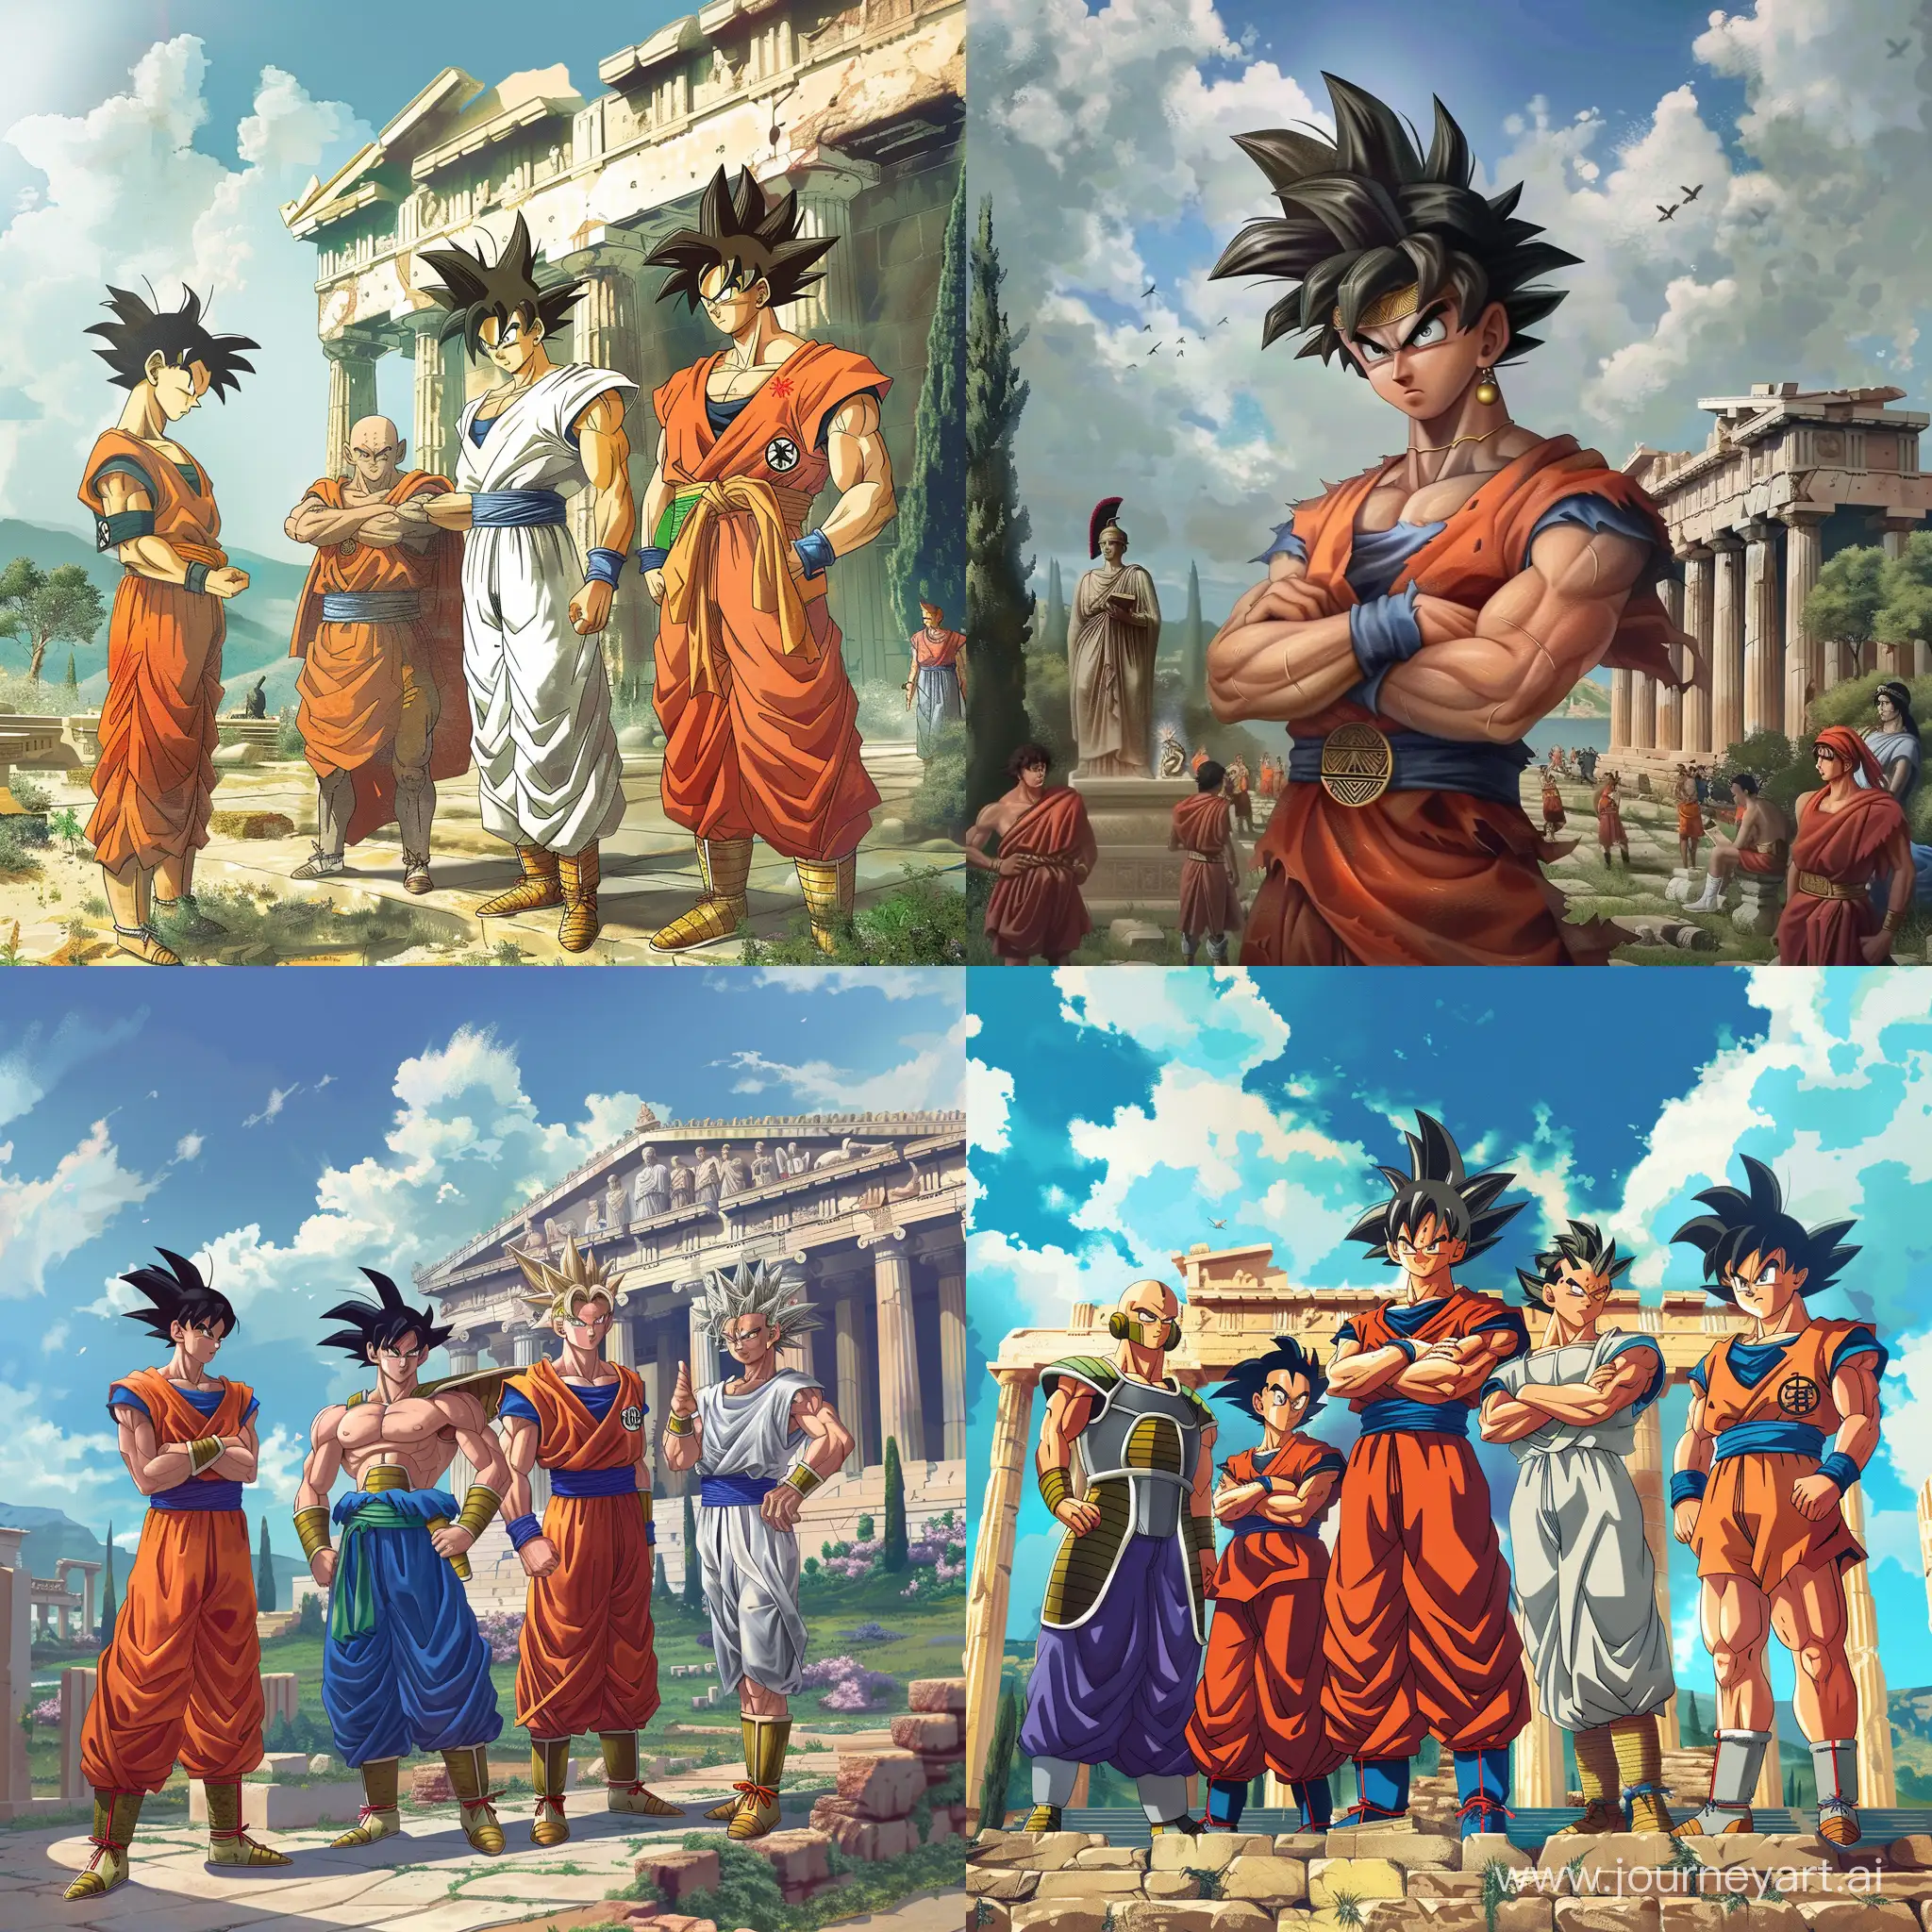 Dragonball characters in ancient grece